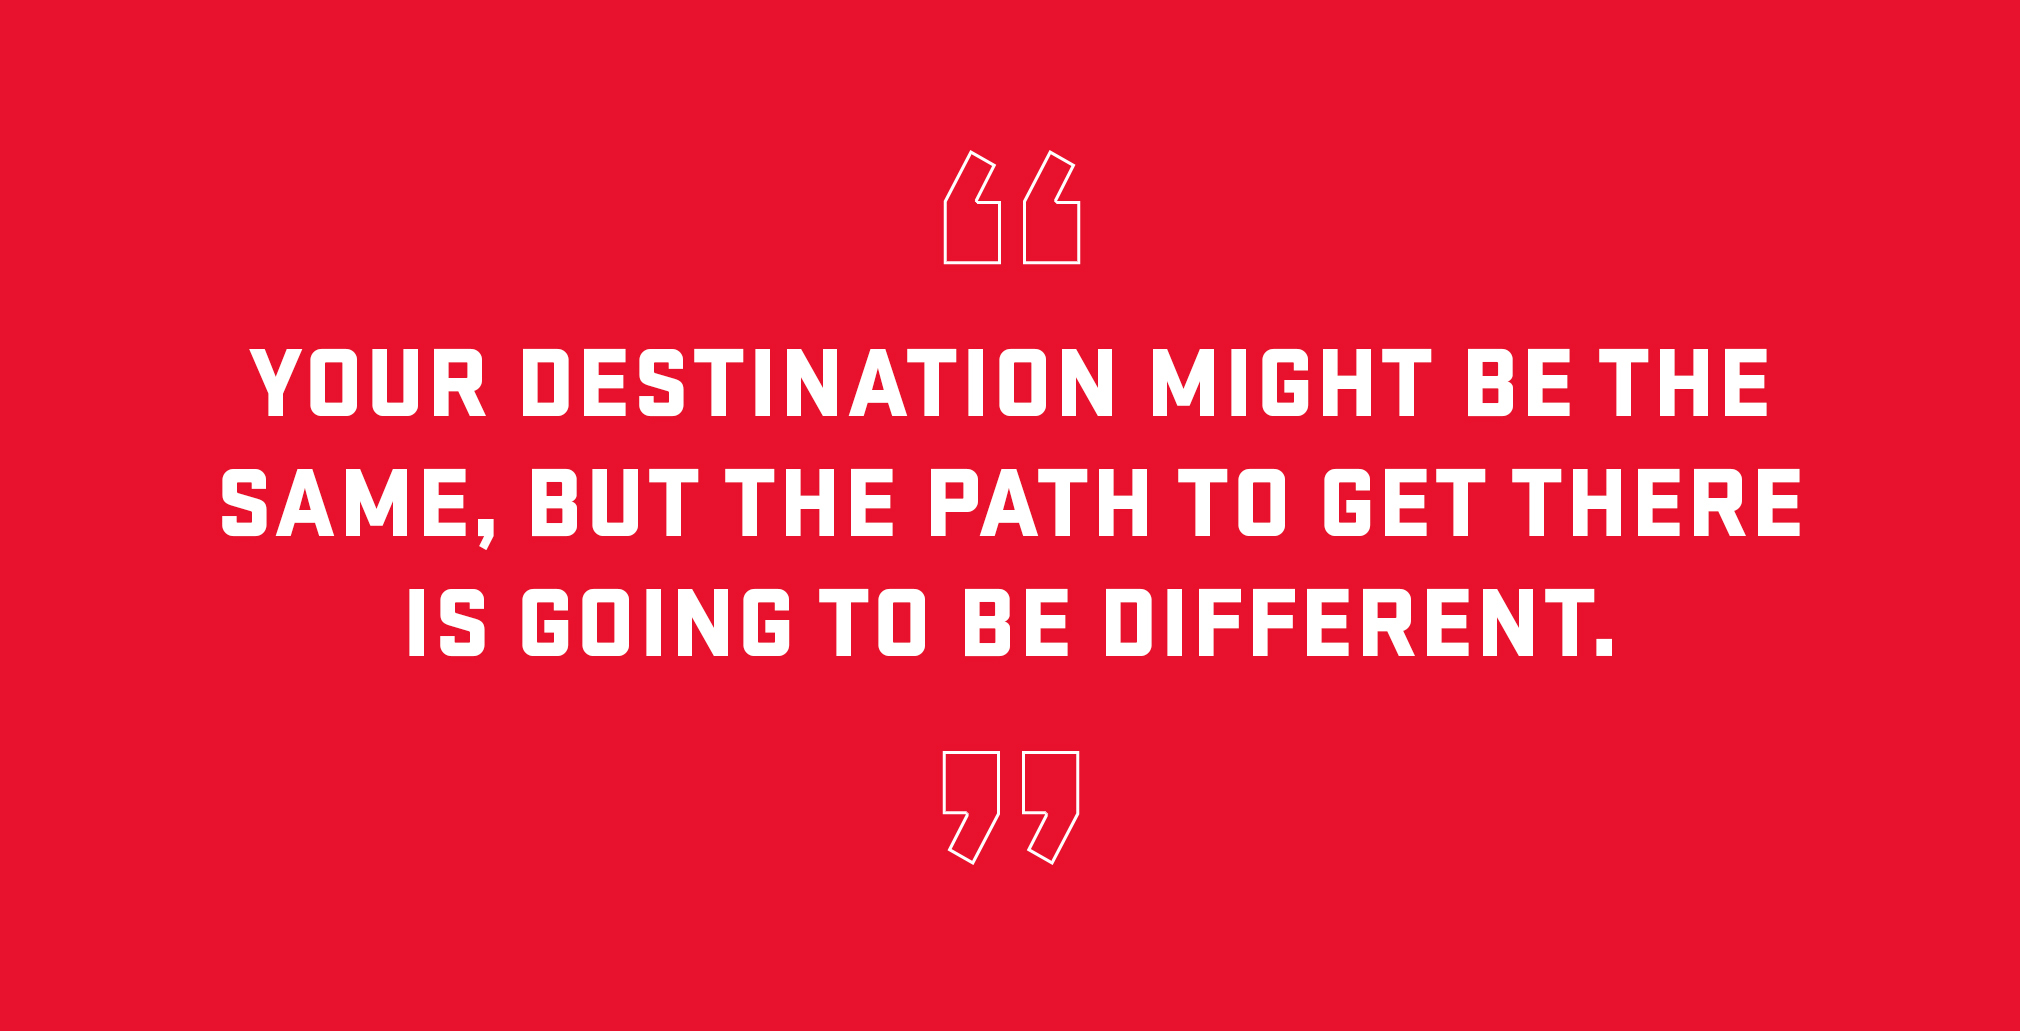 Block quote: Your destination might be the same but the path to get there is going to be different. 